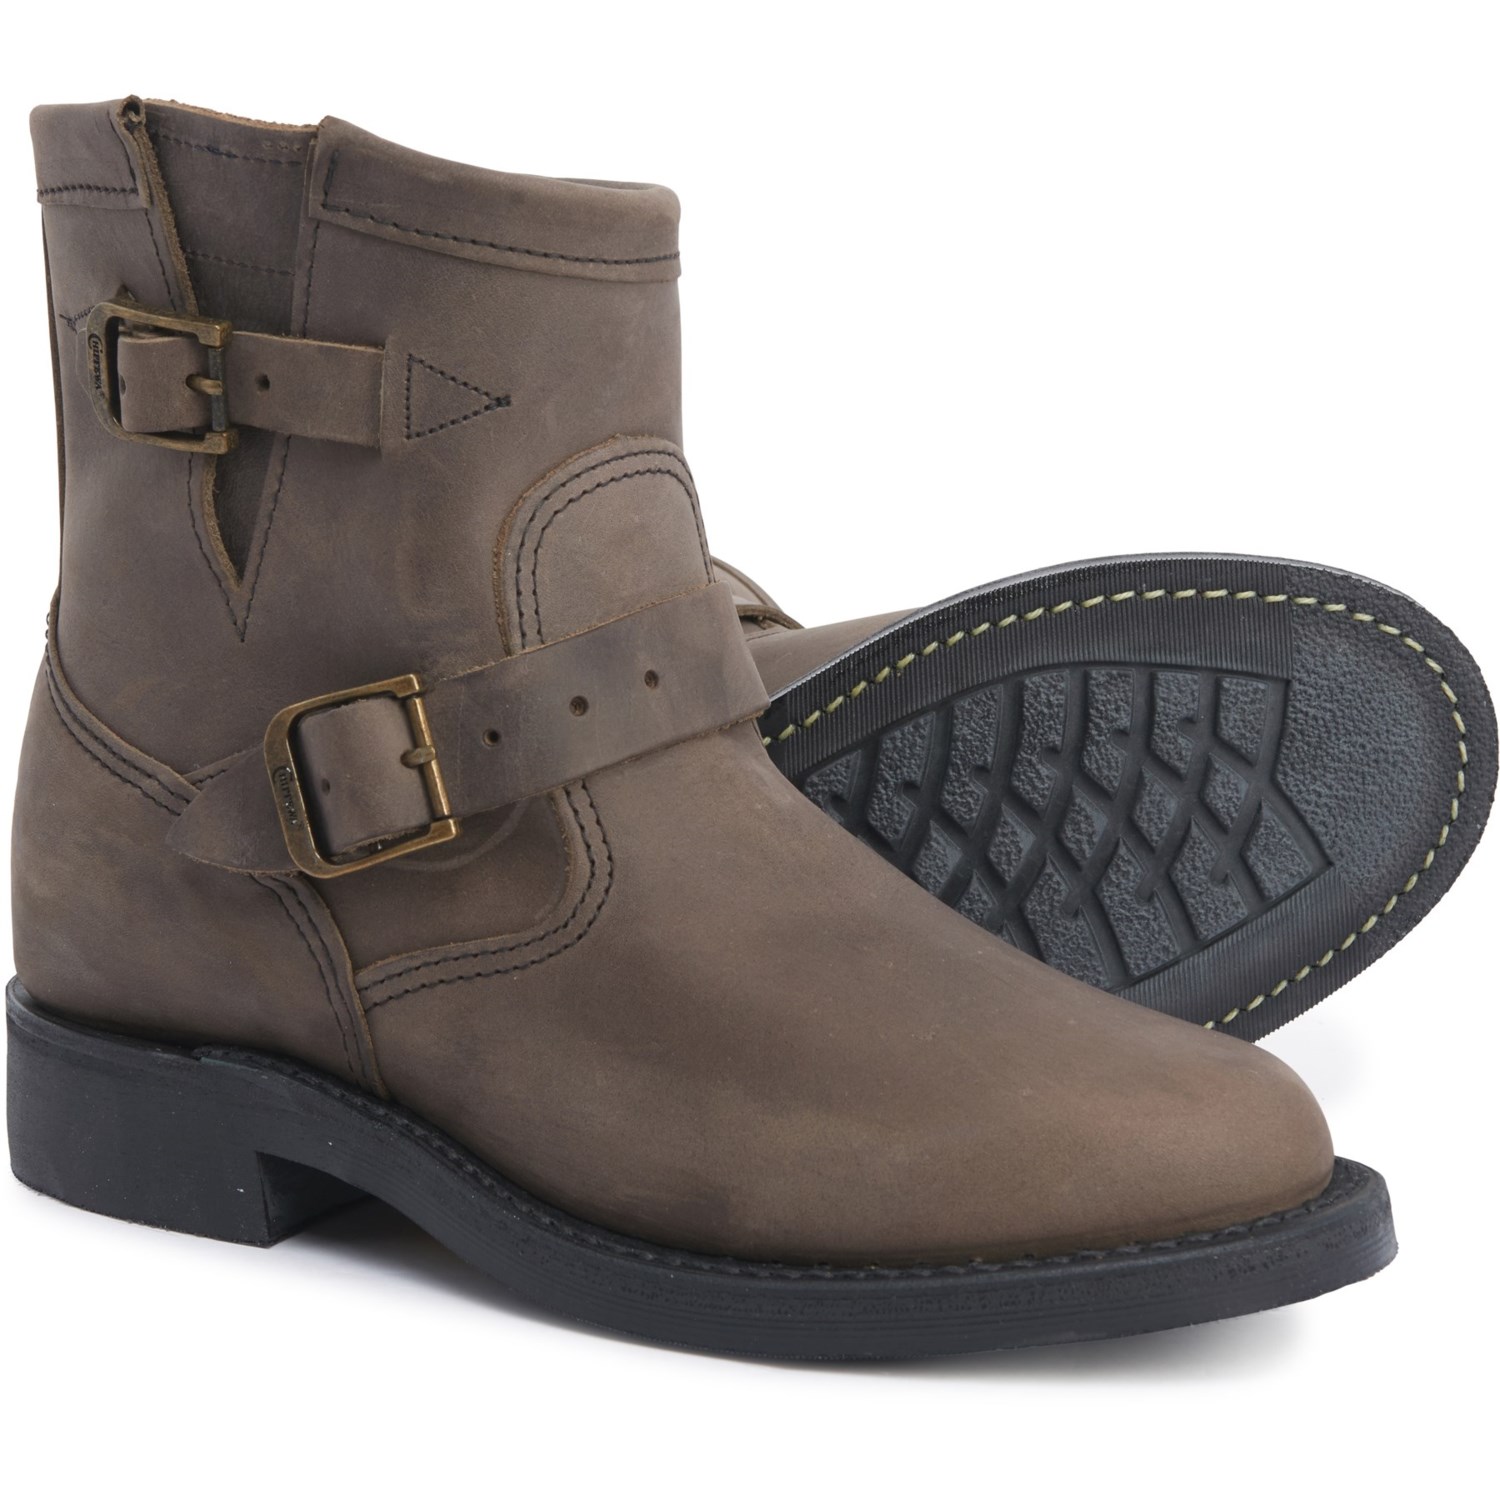 gray boots for women